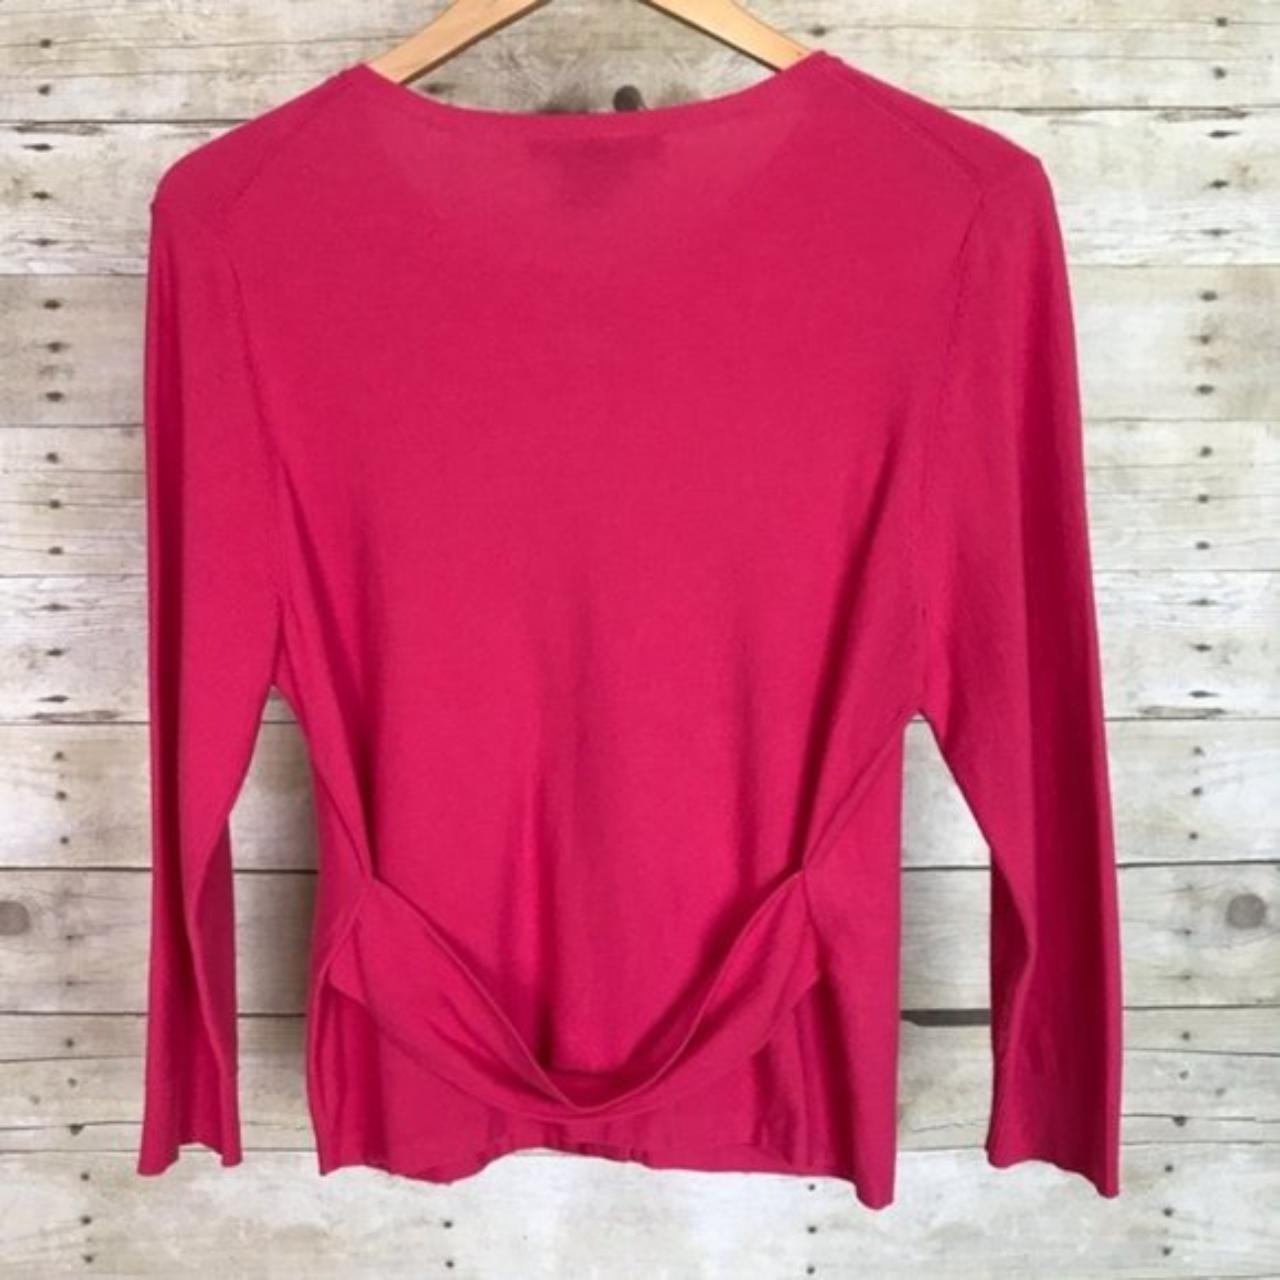 Etcetera E3 Bright Pink Cardigan Button Up with... - Depop